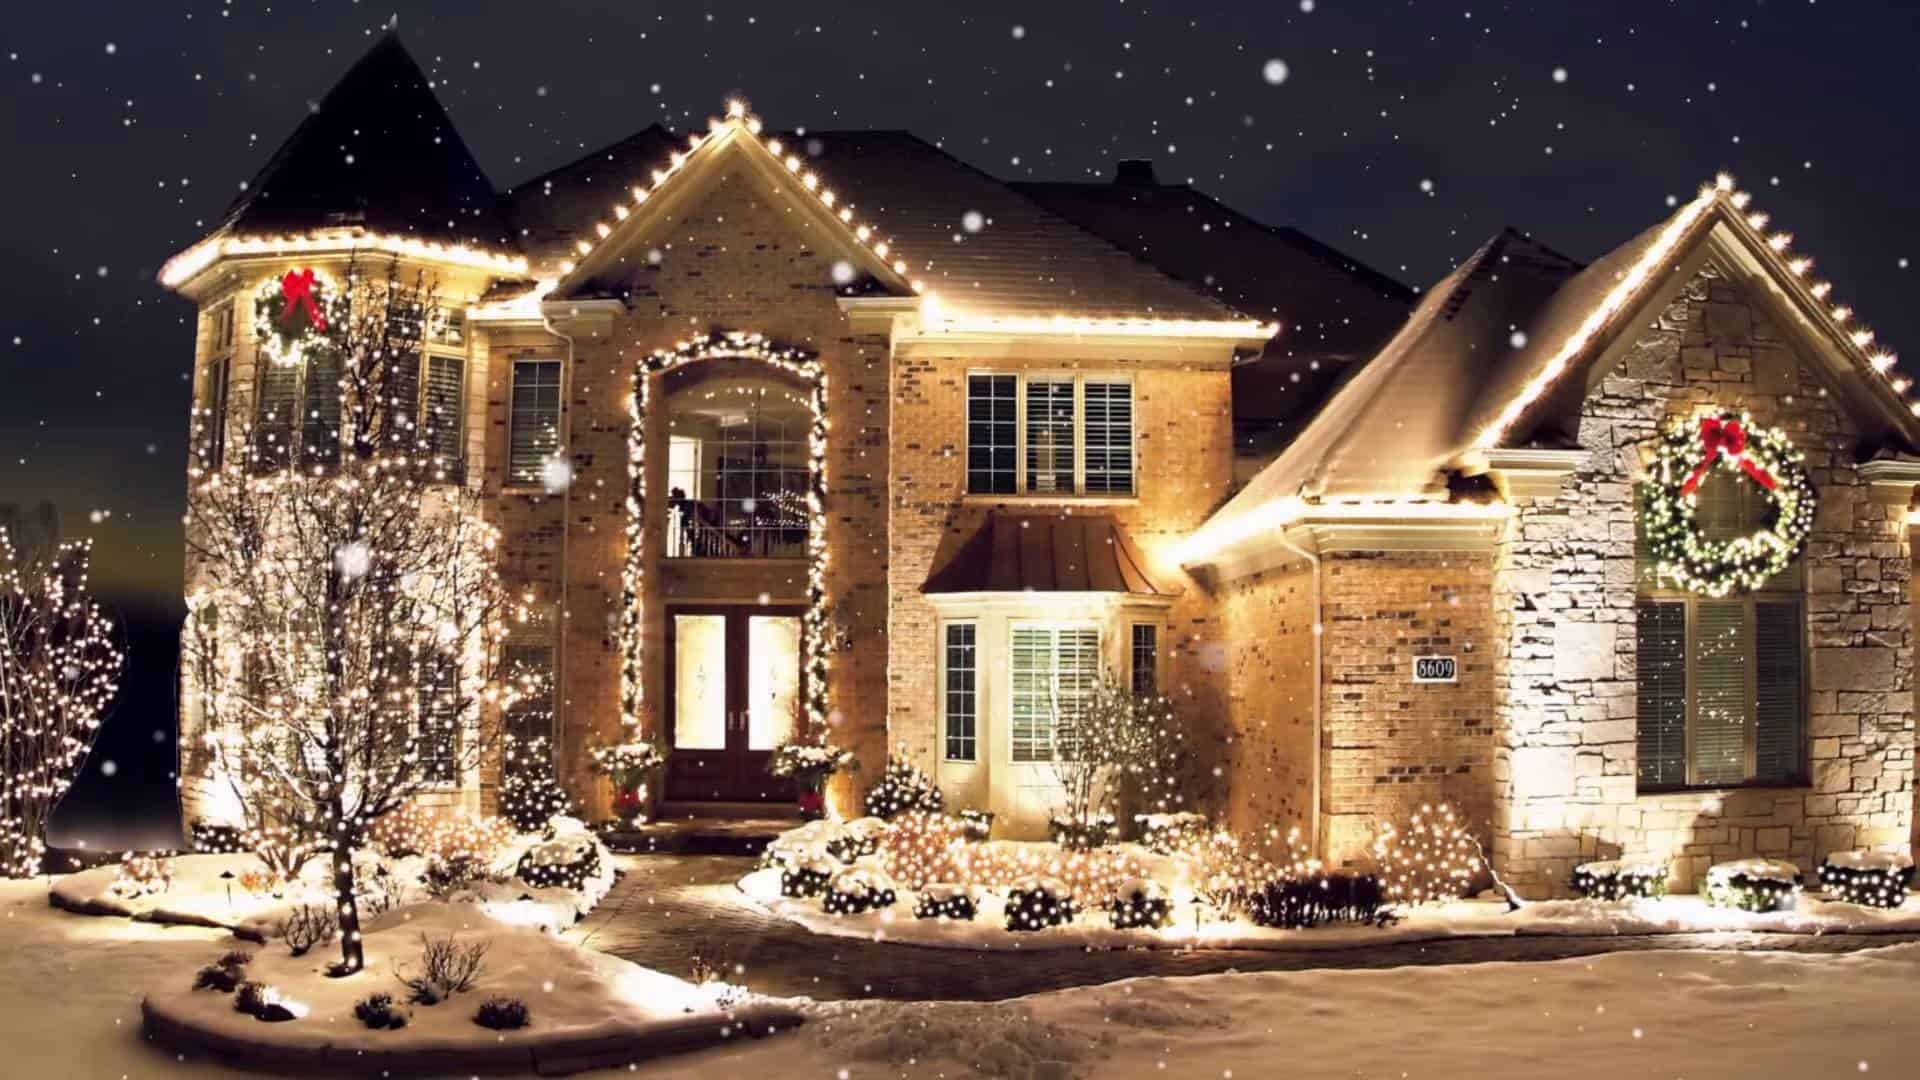 If you cant decide which light fixtures to incorporate on the outside of your home consider mixing and matching your favorite lights